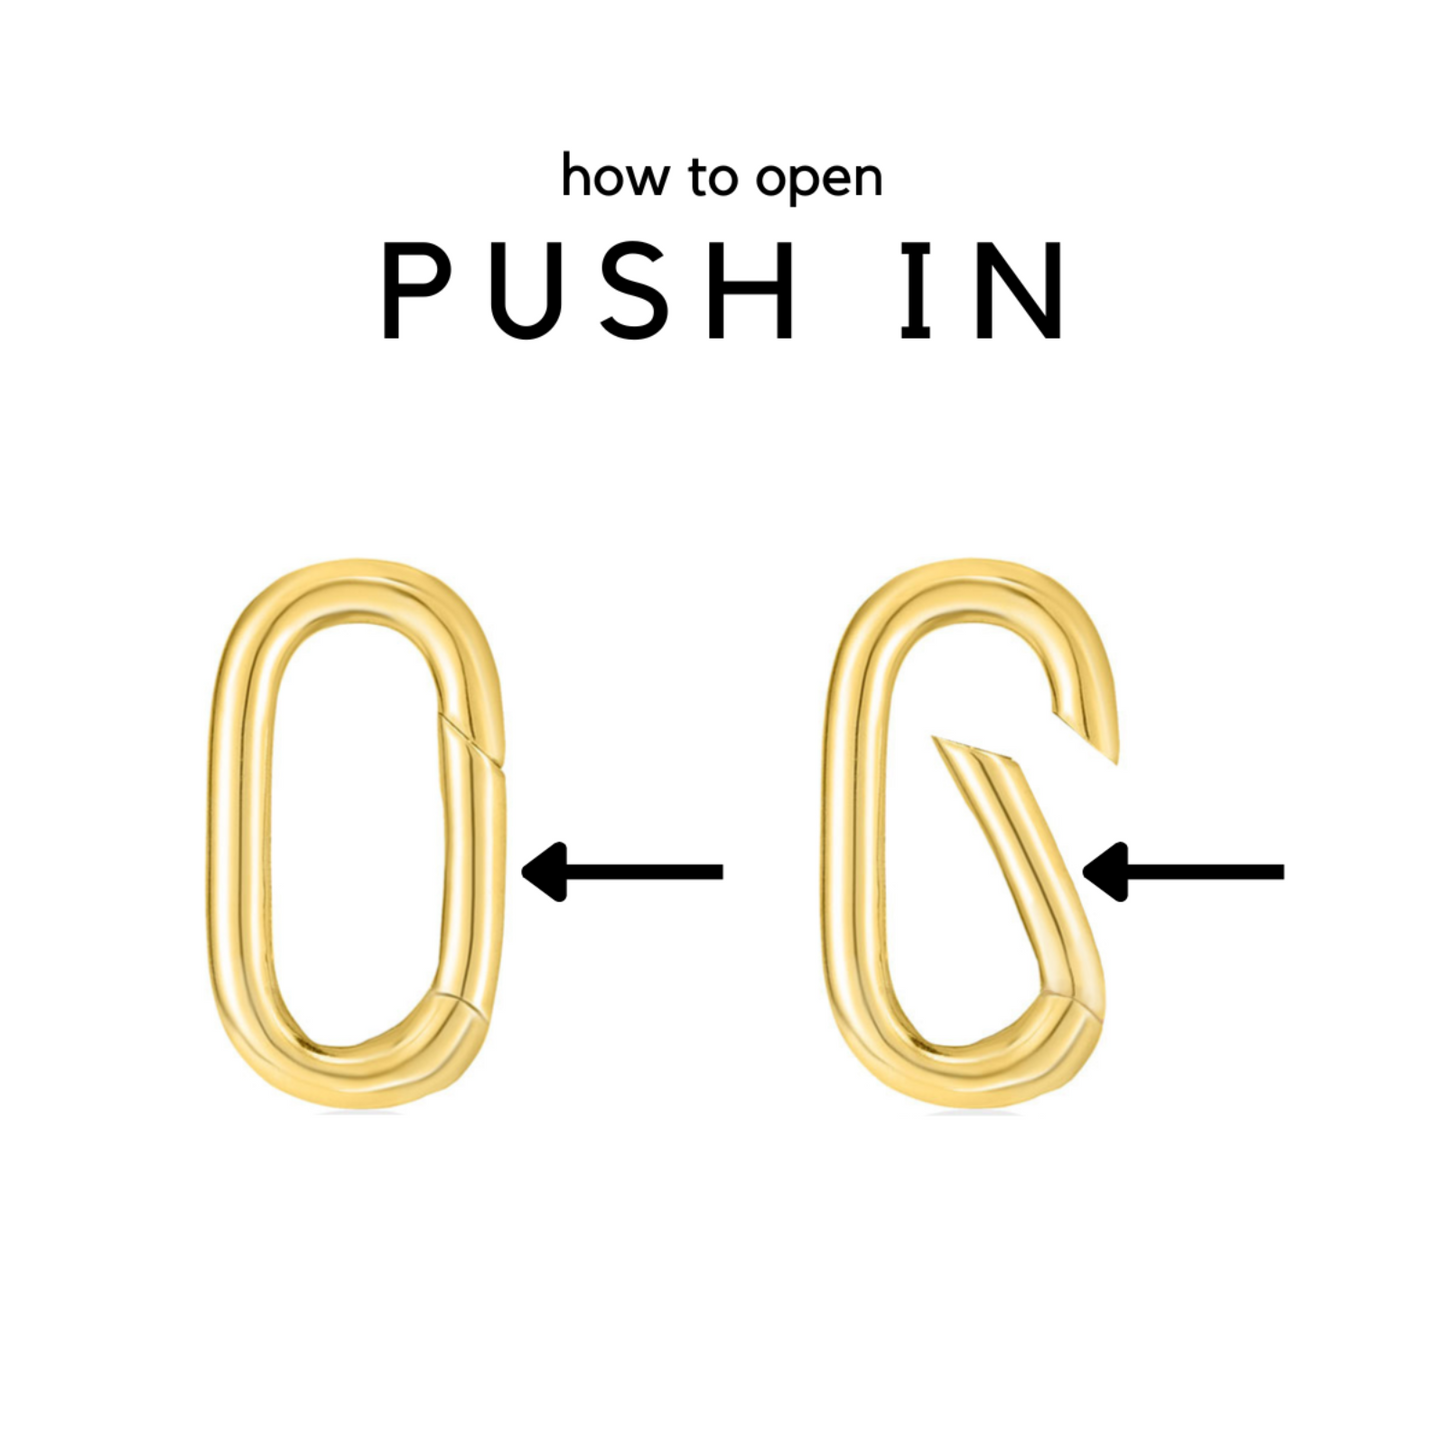 Push In Charm Opened and Closed